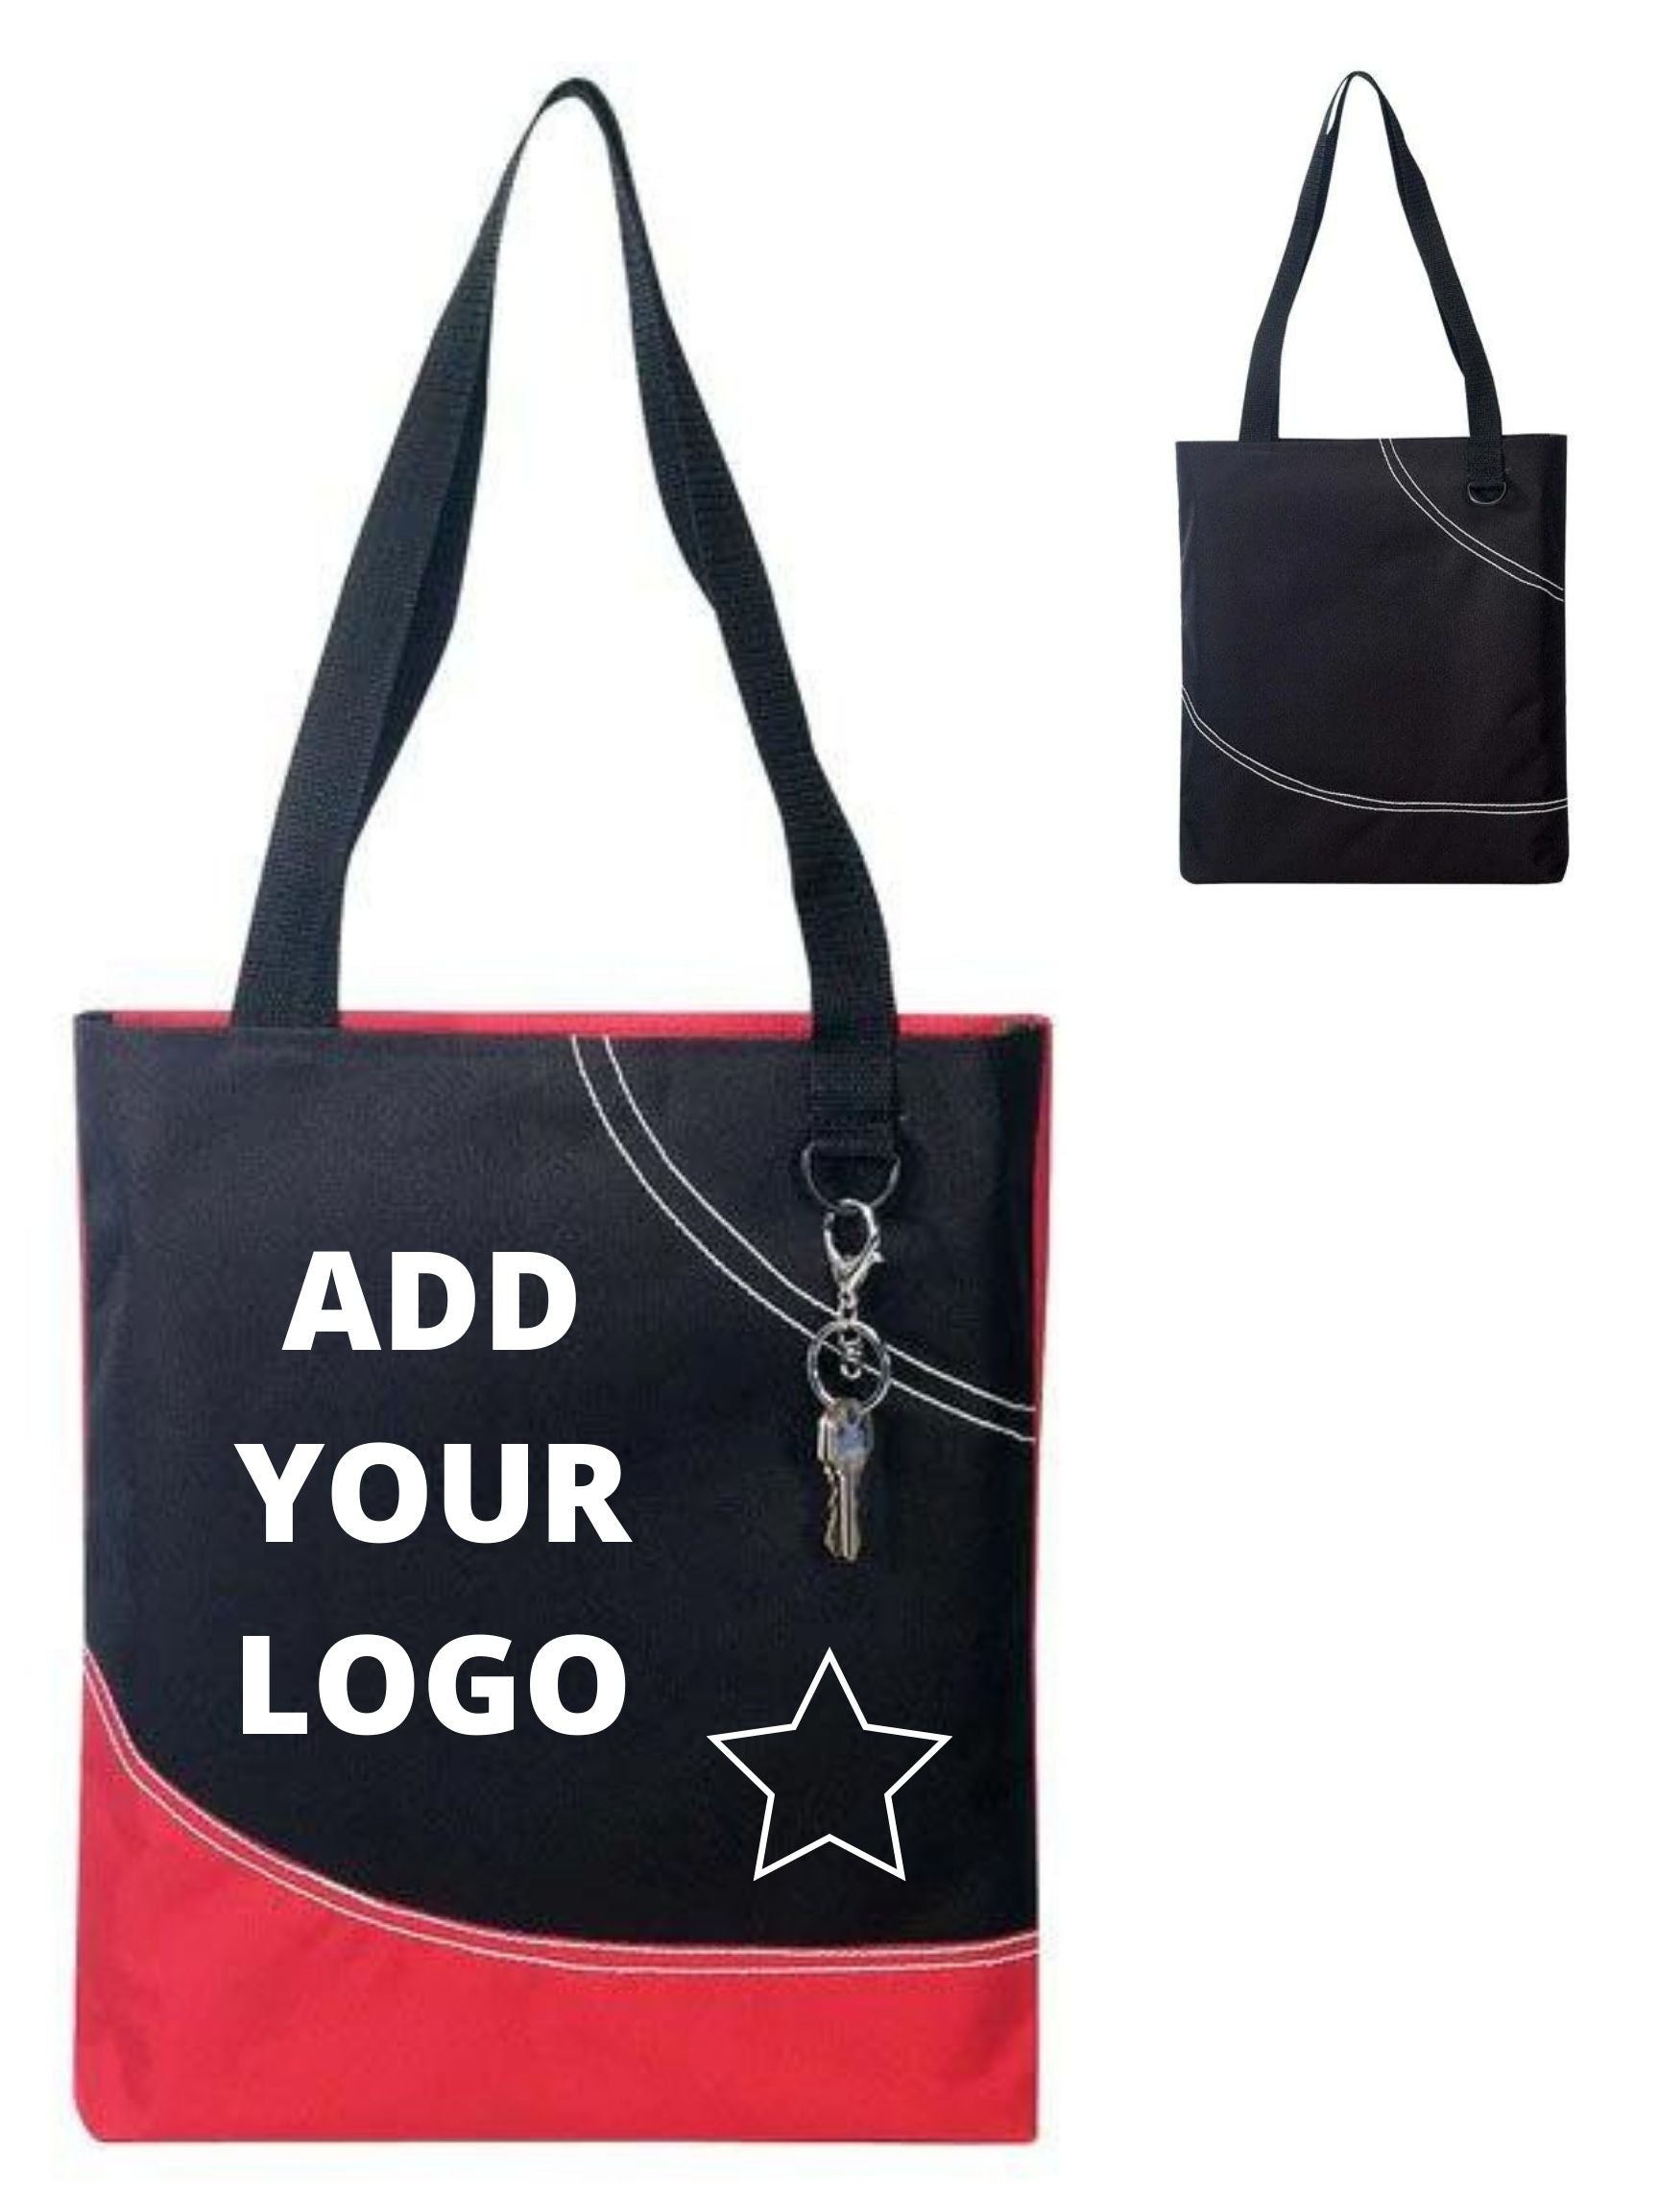 Two Tone Polyester Tote Bags With Long Handles